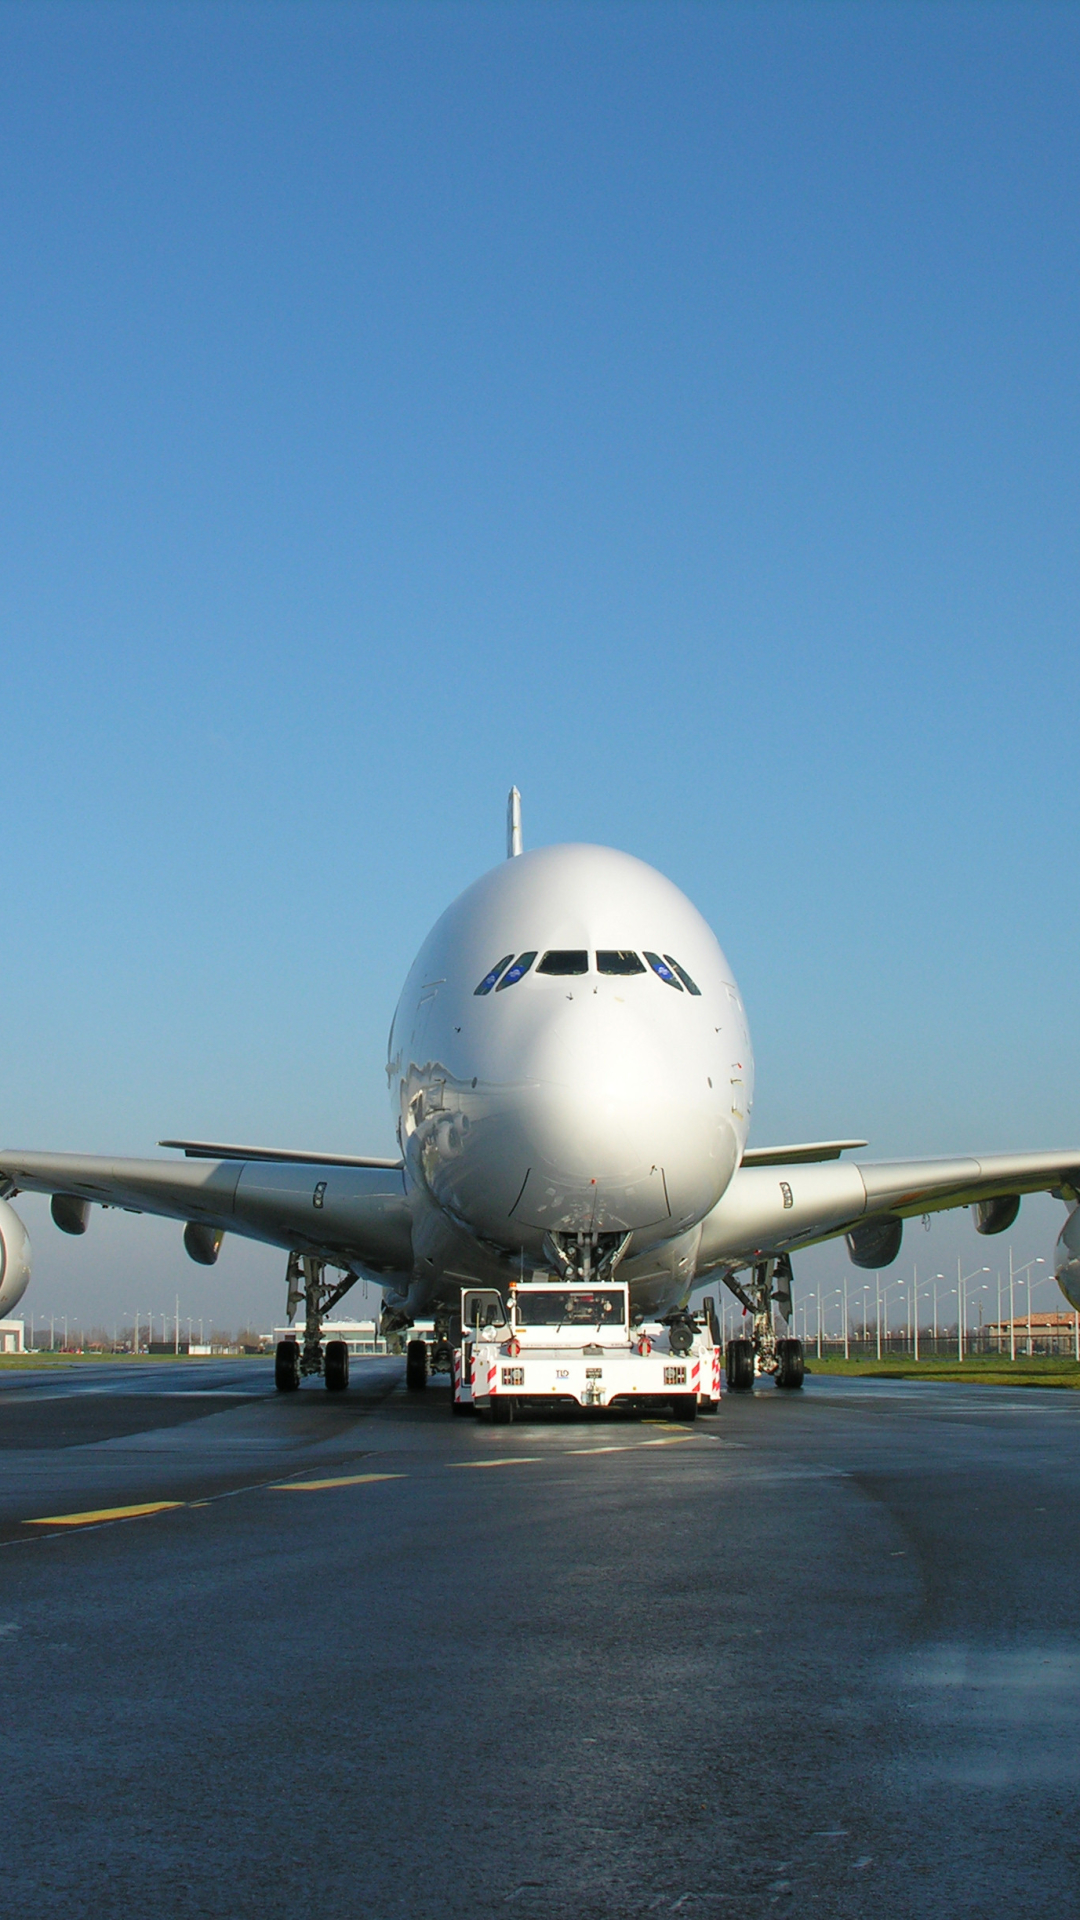 Airbus A380, the world's largest passenger plane